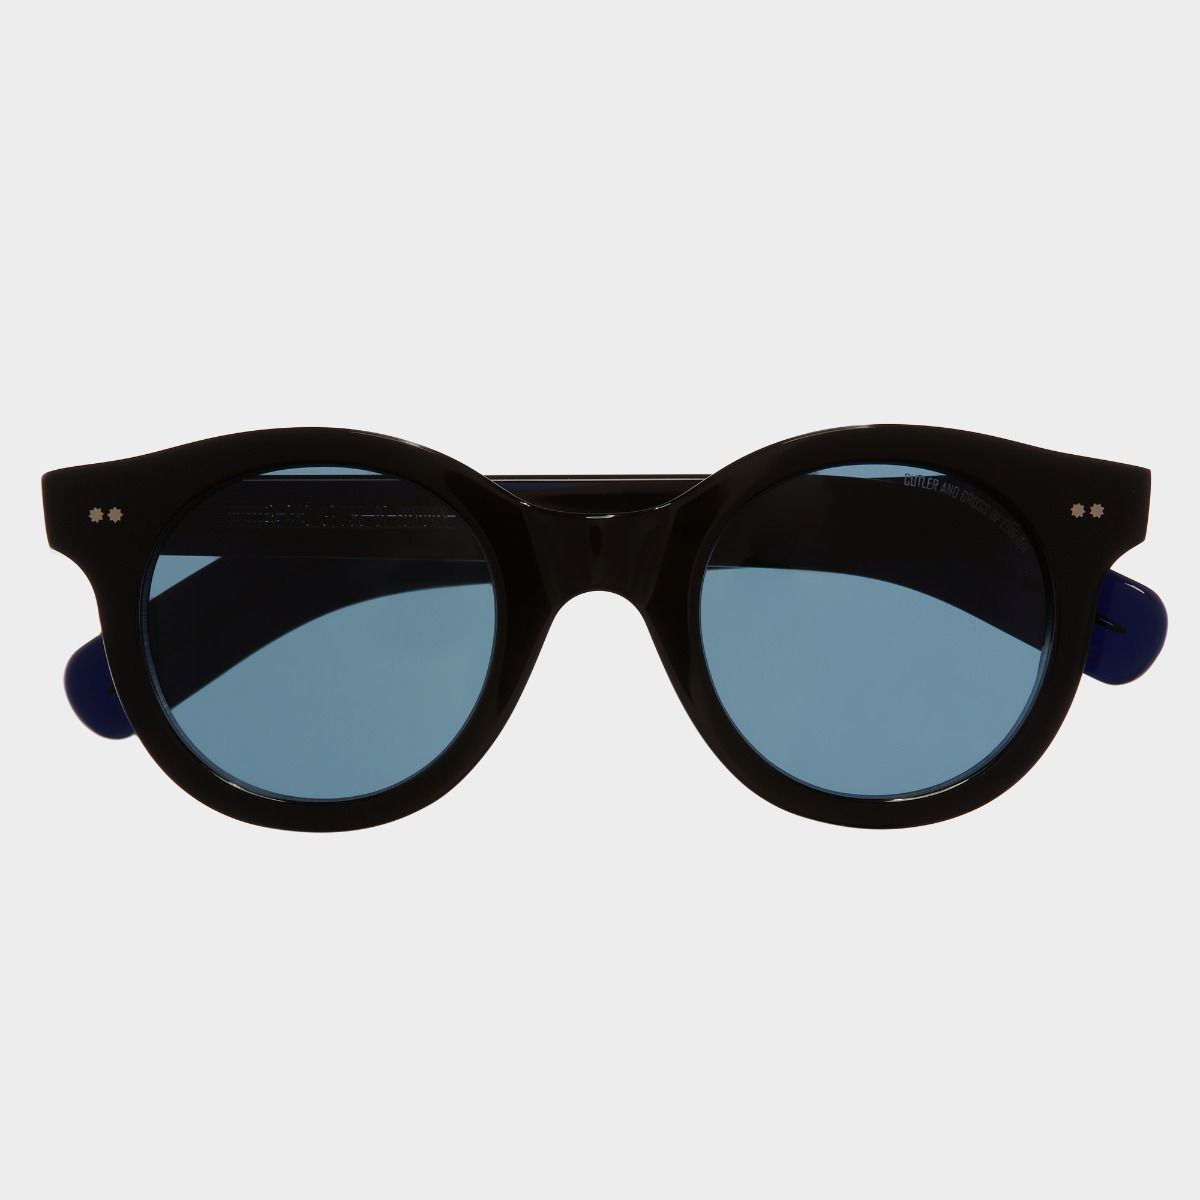 Cutler and Gross, 1390 Round Sunglasses - Black on Blue